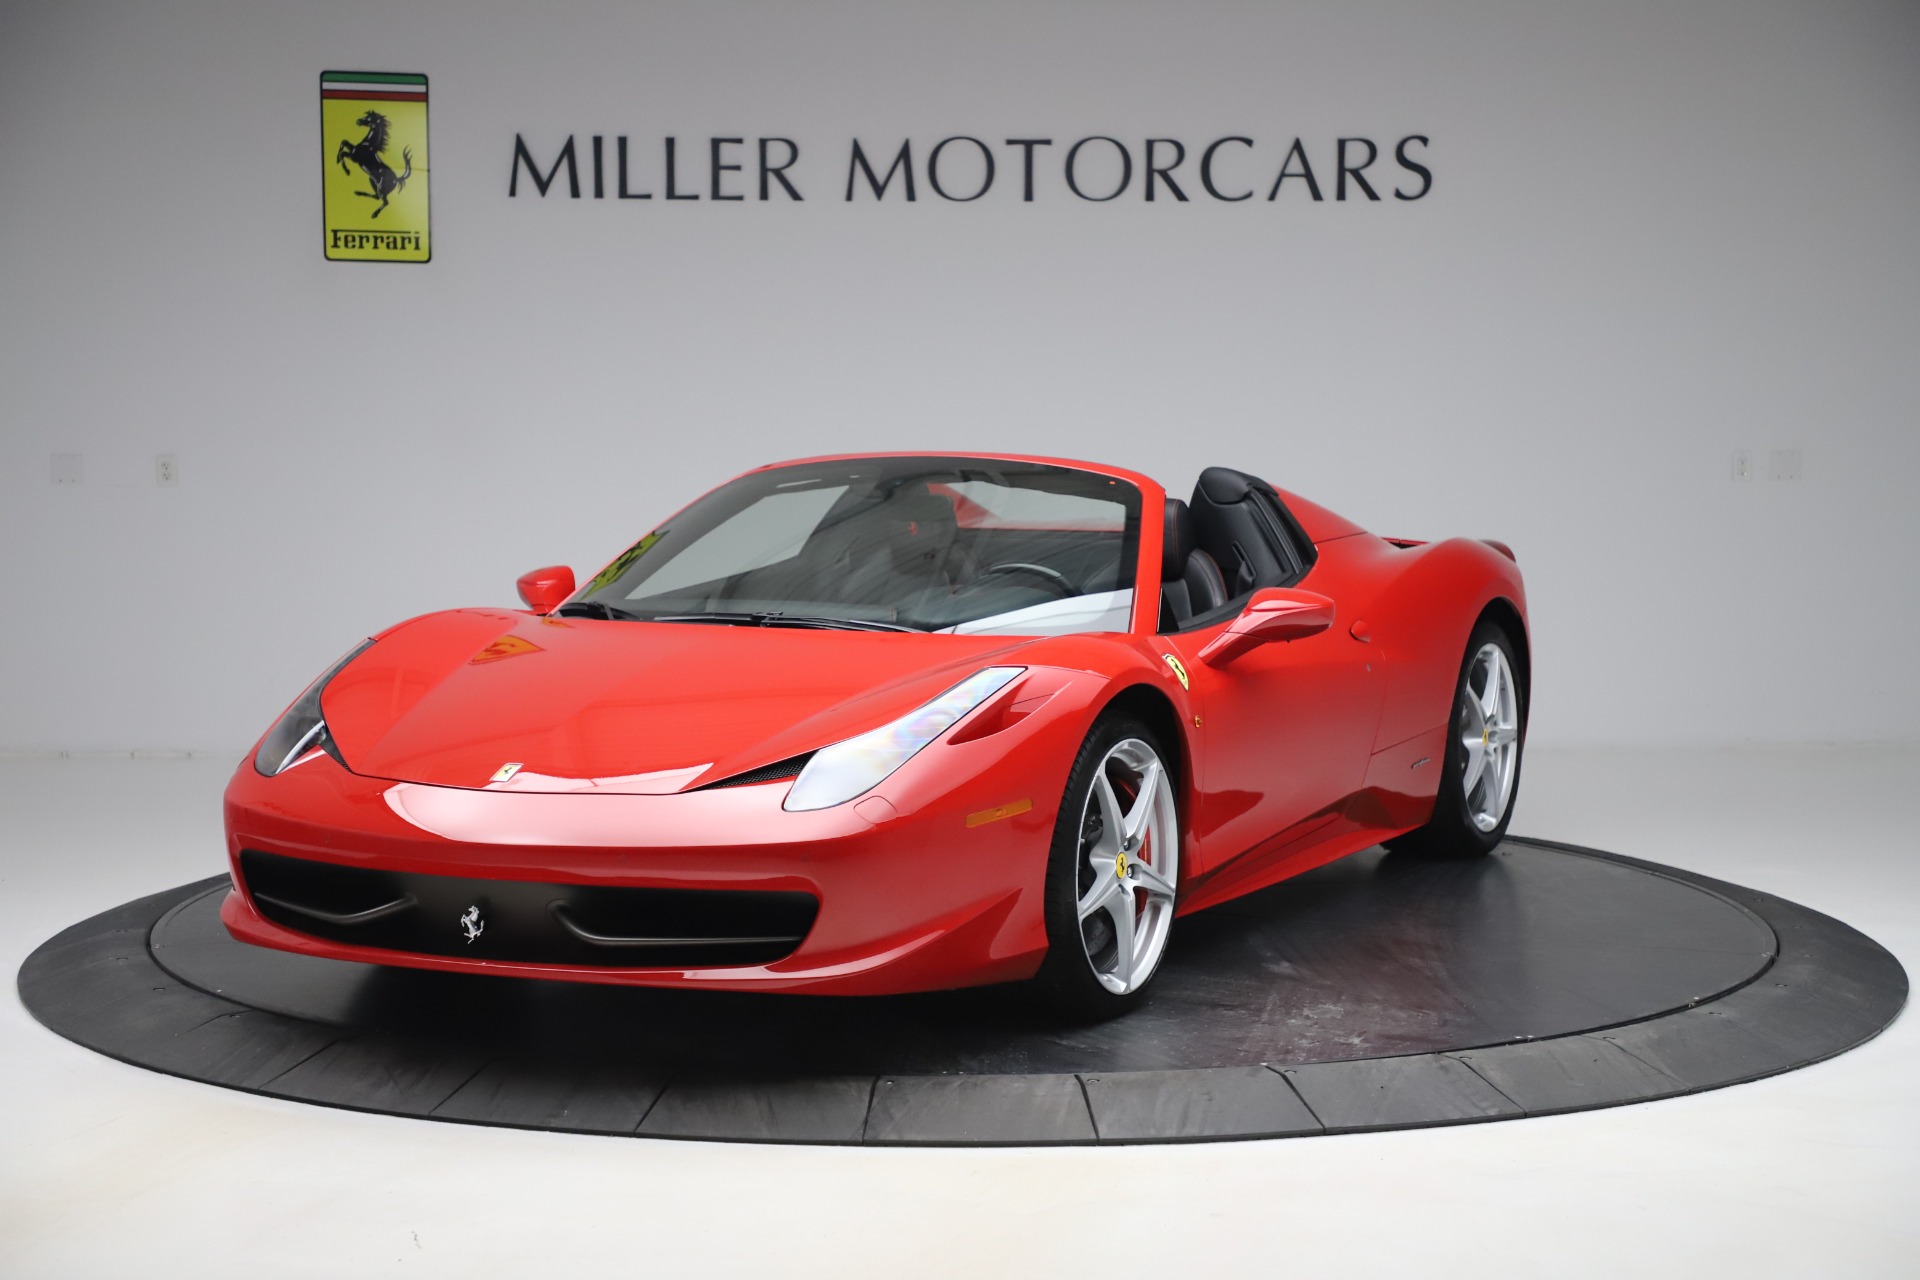 Used 2015 Ferrari 458 Spider for sale Sold at McLaren Greenwich in Greenwich CT 06830 1